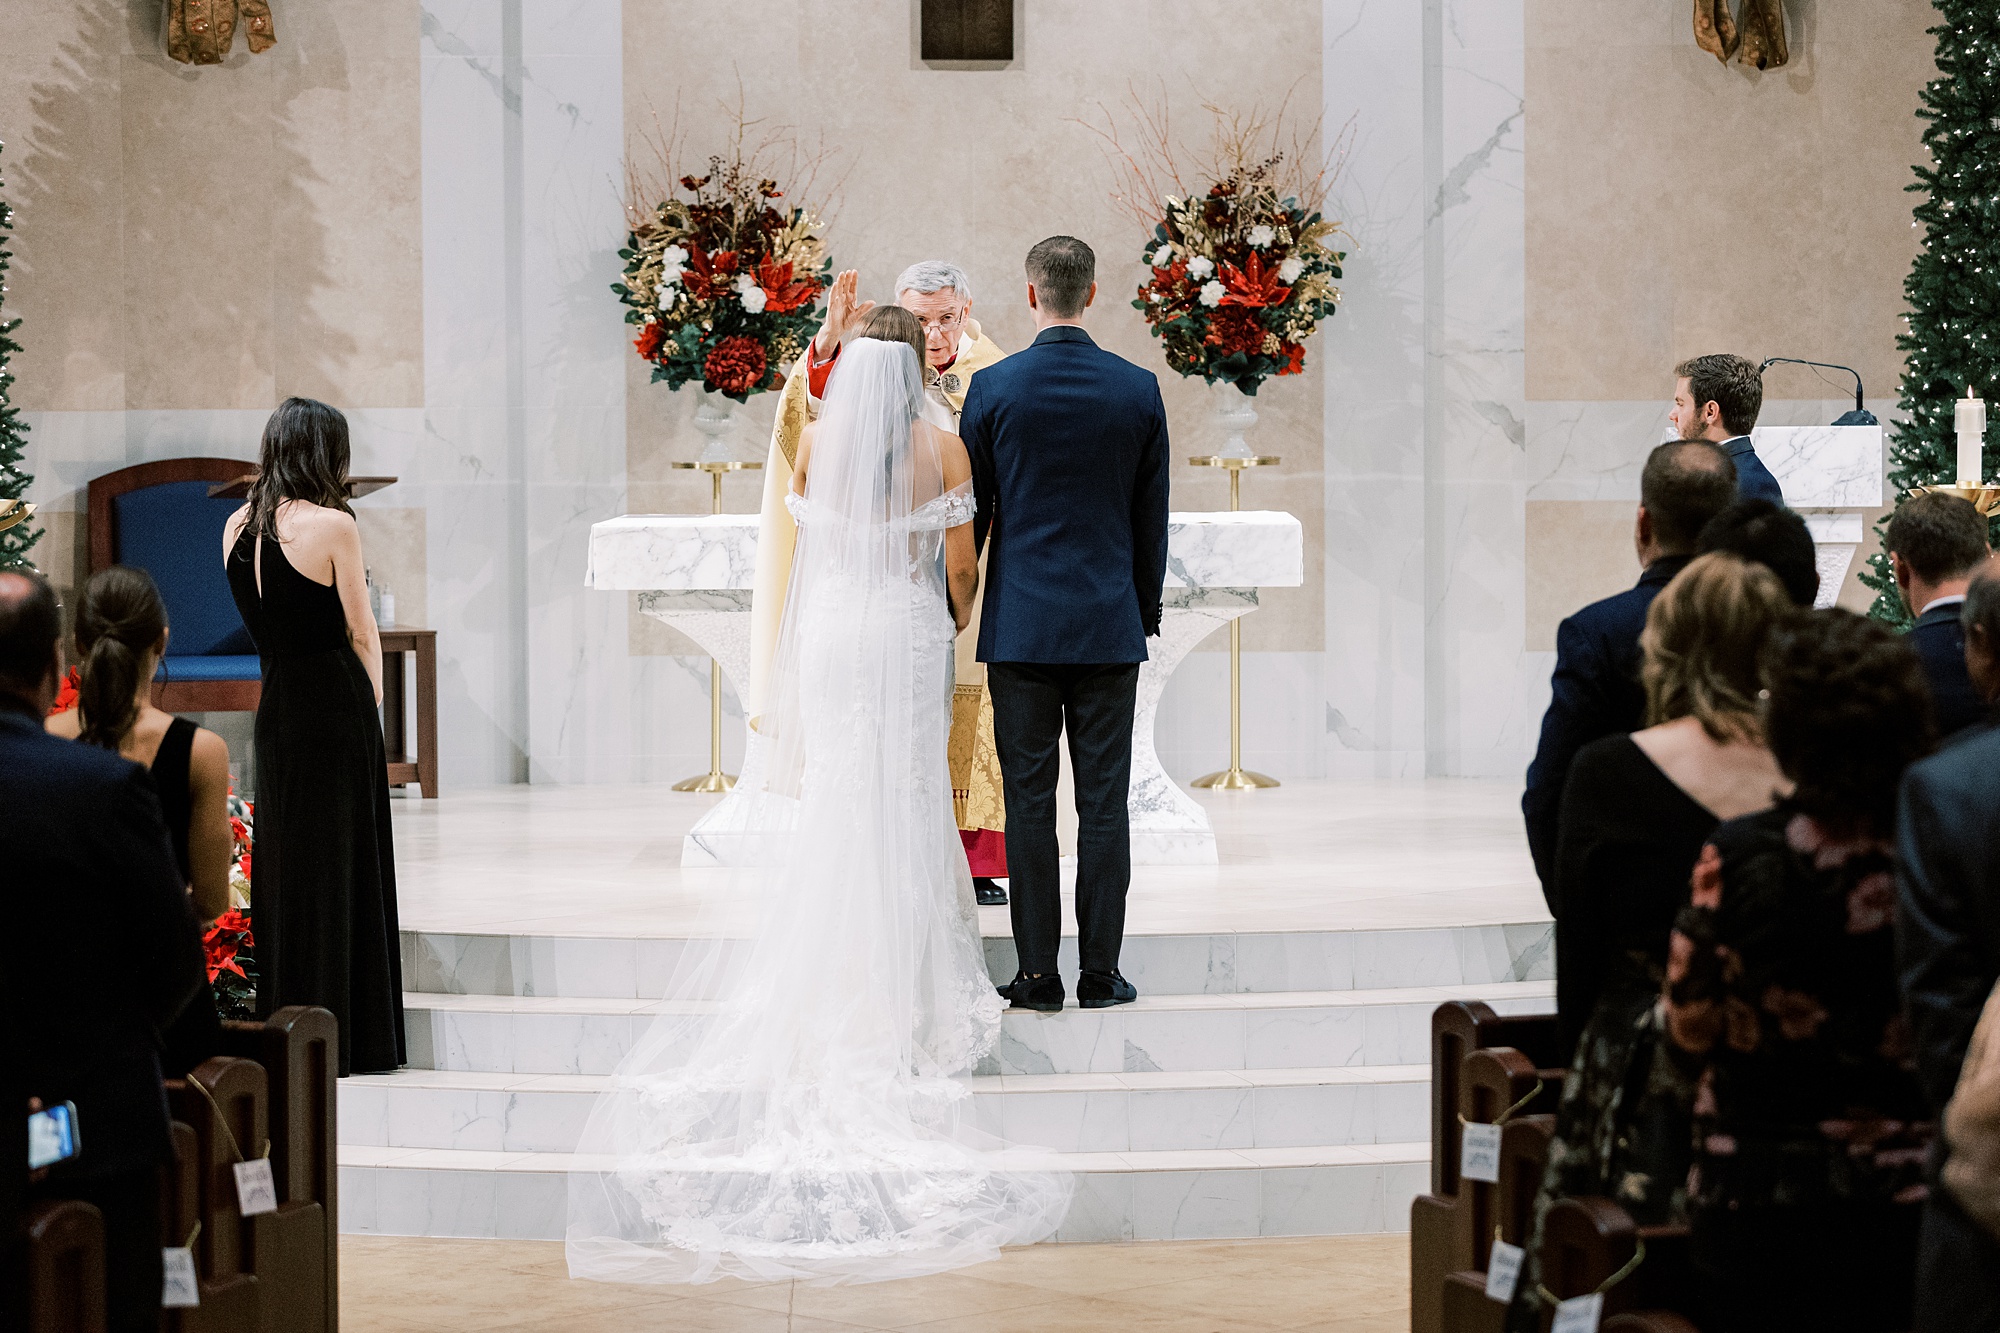 bride and groom stand at alter during wedding ceremony at St. Helen's Church in Westfield NJ